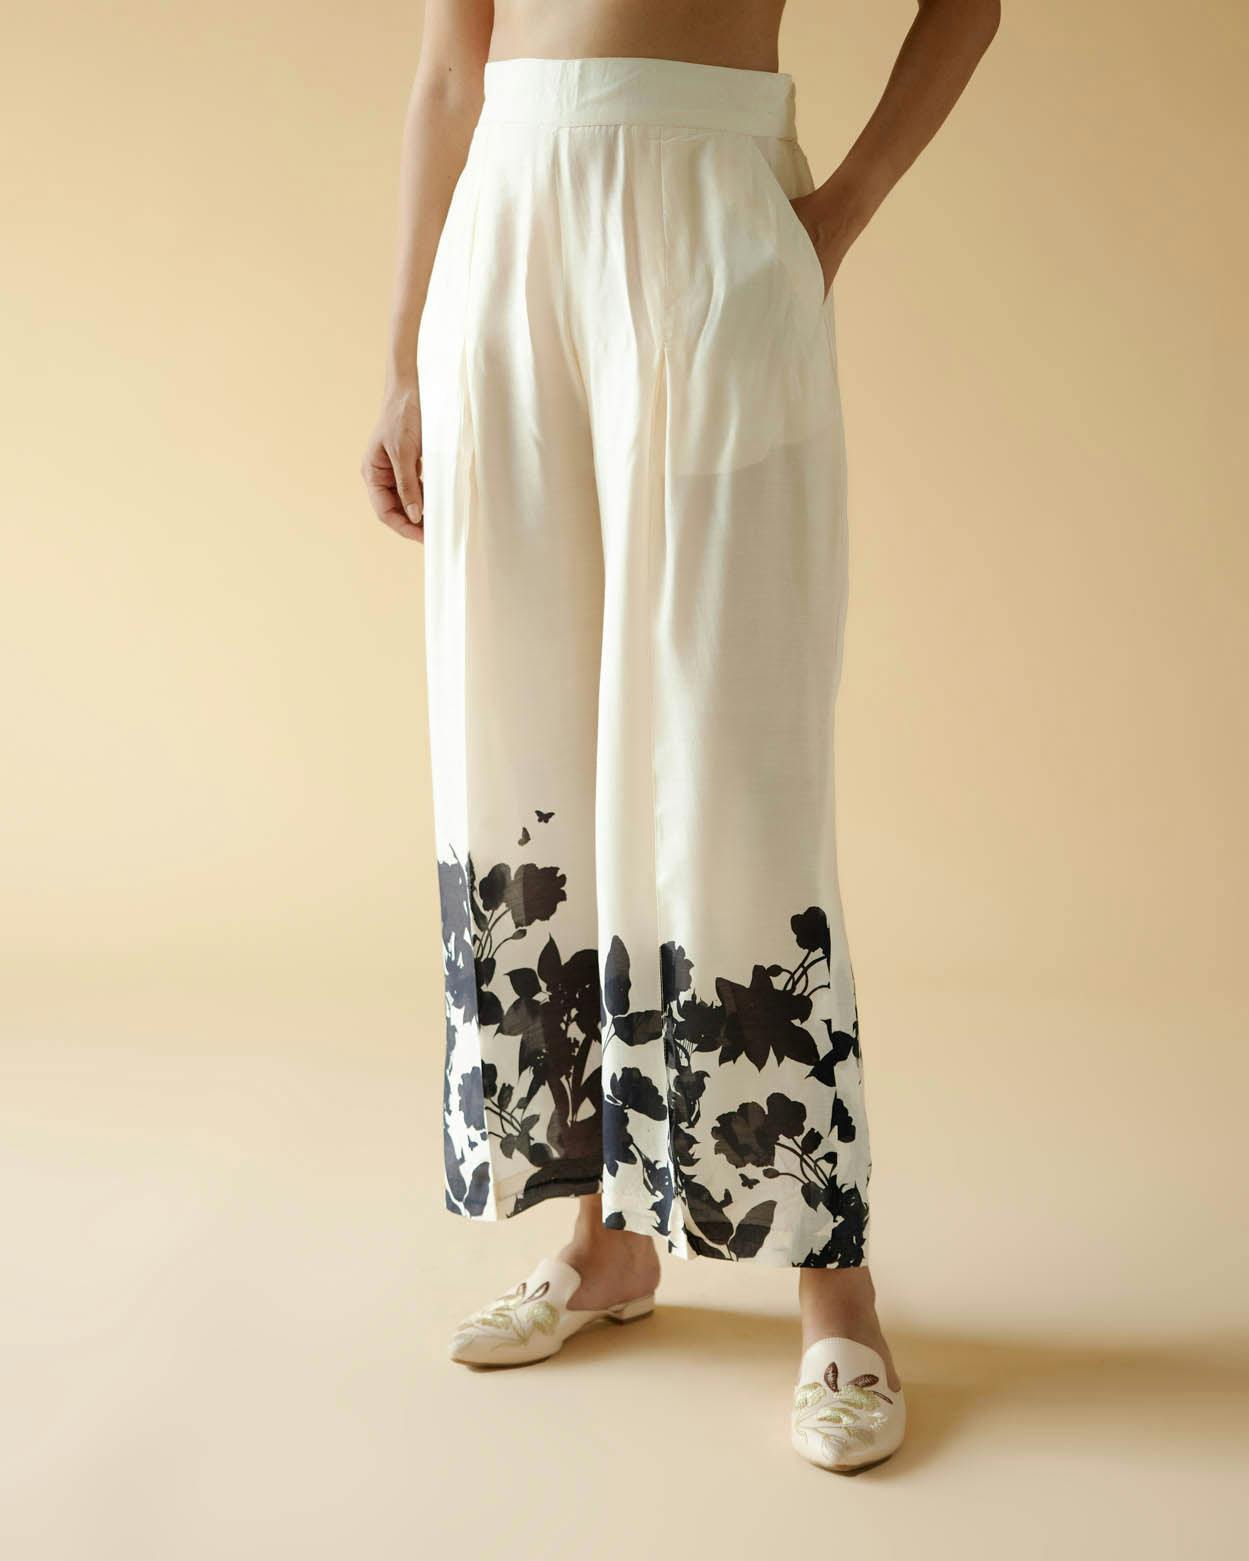 Savannah Trousers, a product by Moh India